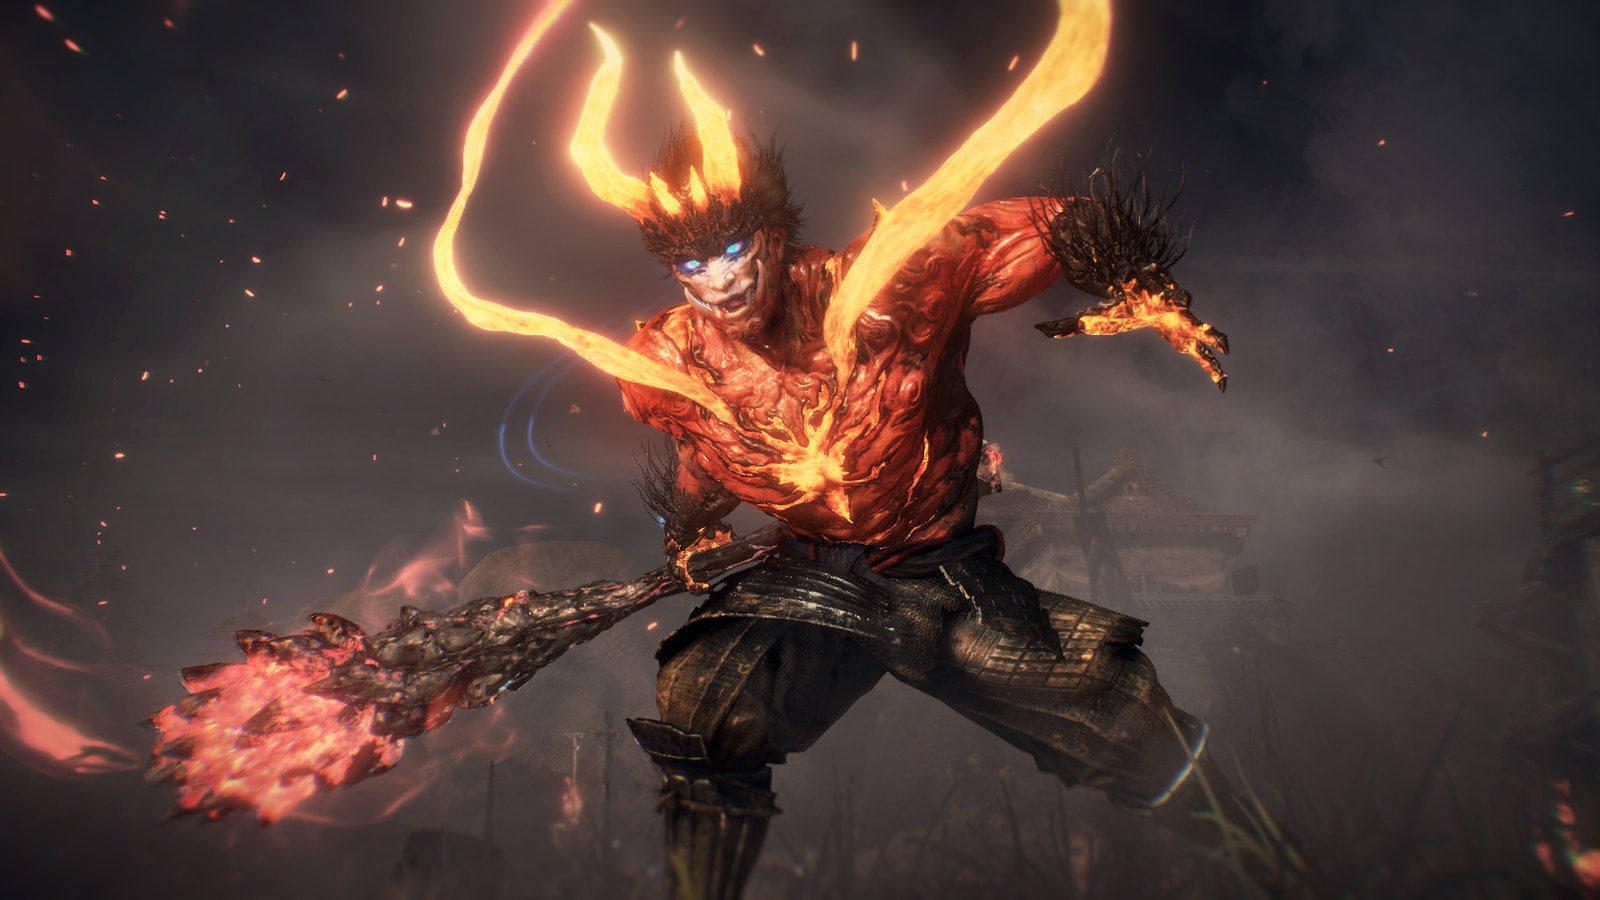 Image for Nioh 2 PC trailer shows off ultra-wide support, 120fps, HDR and more